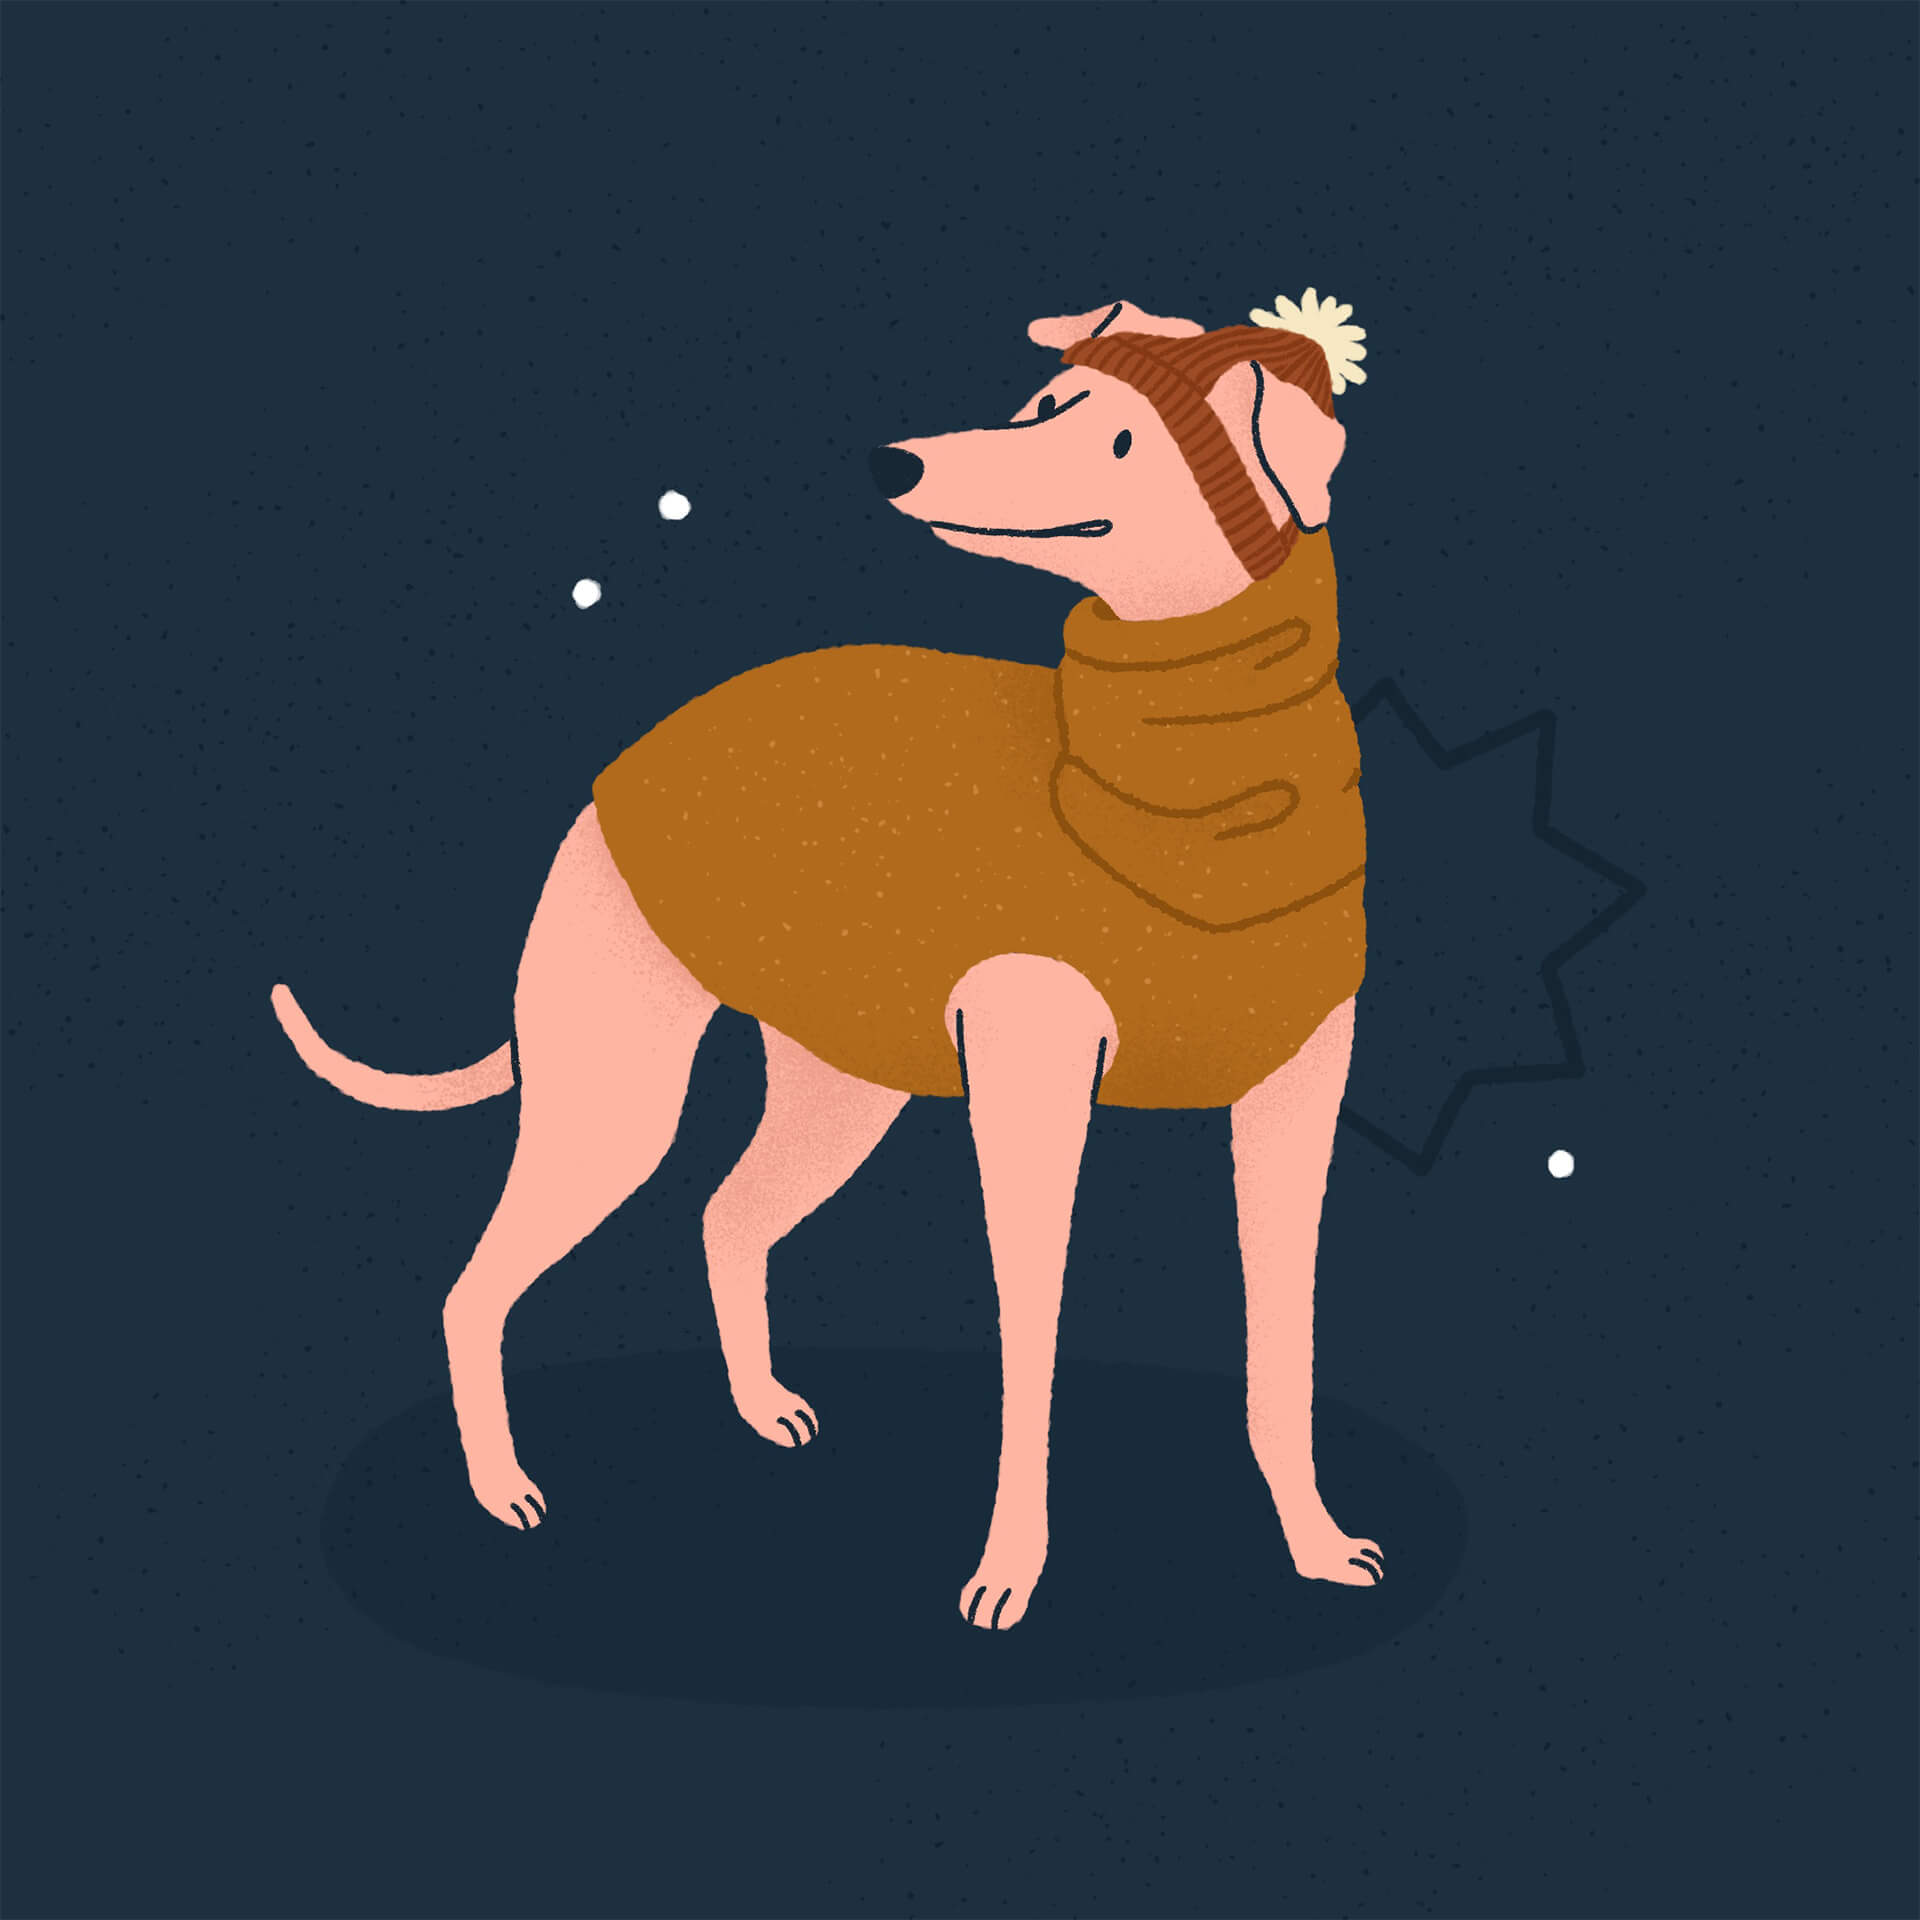 An illustration of a whippet wearing a mustard coloured turtleneck and a dark orange pom pom hat